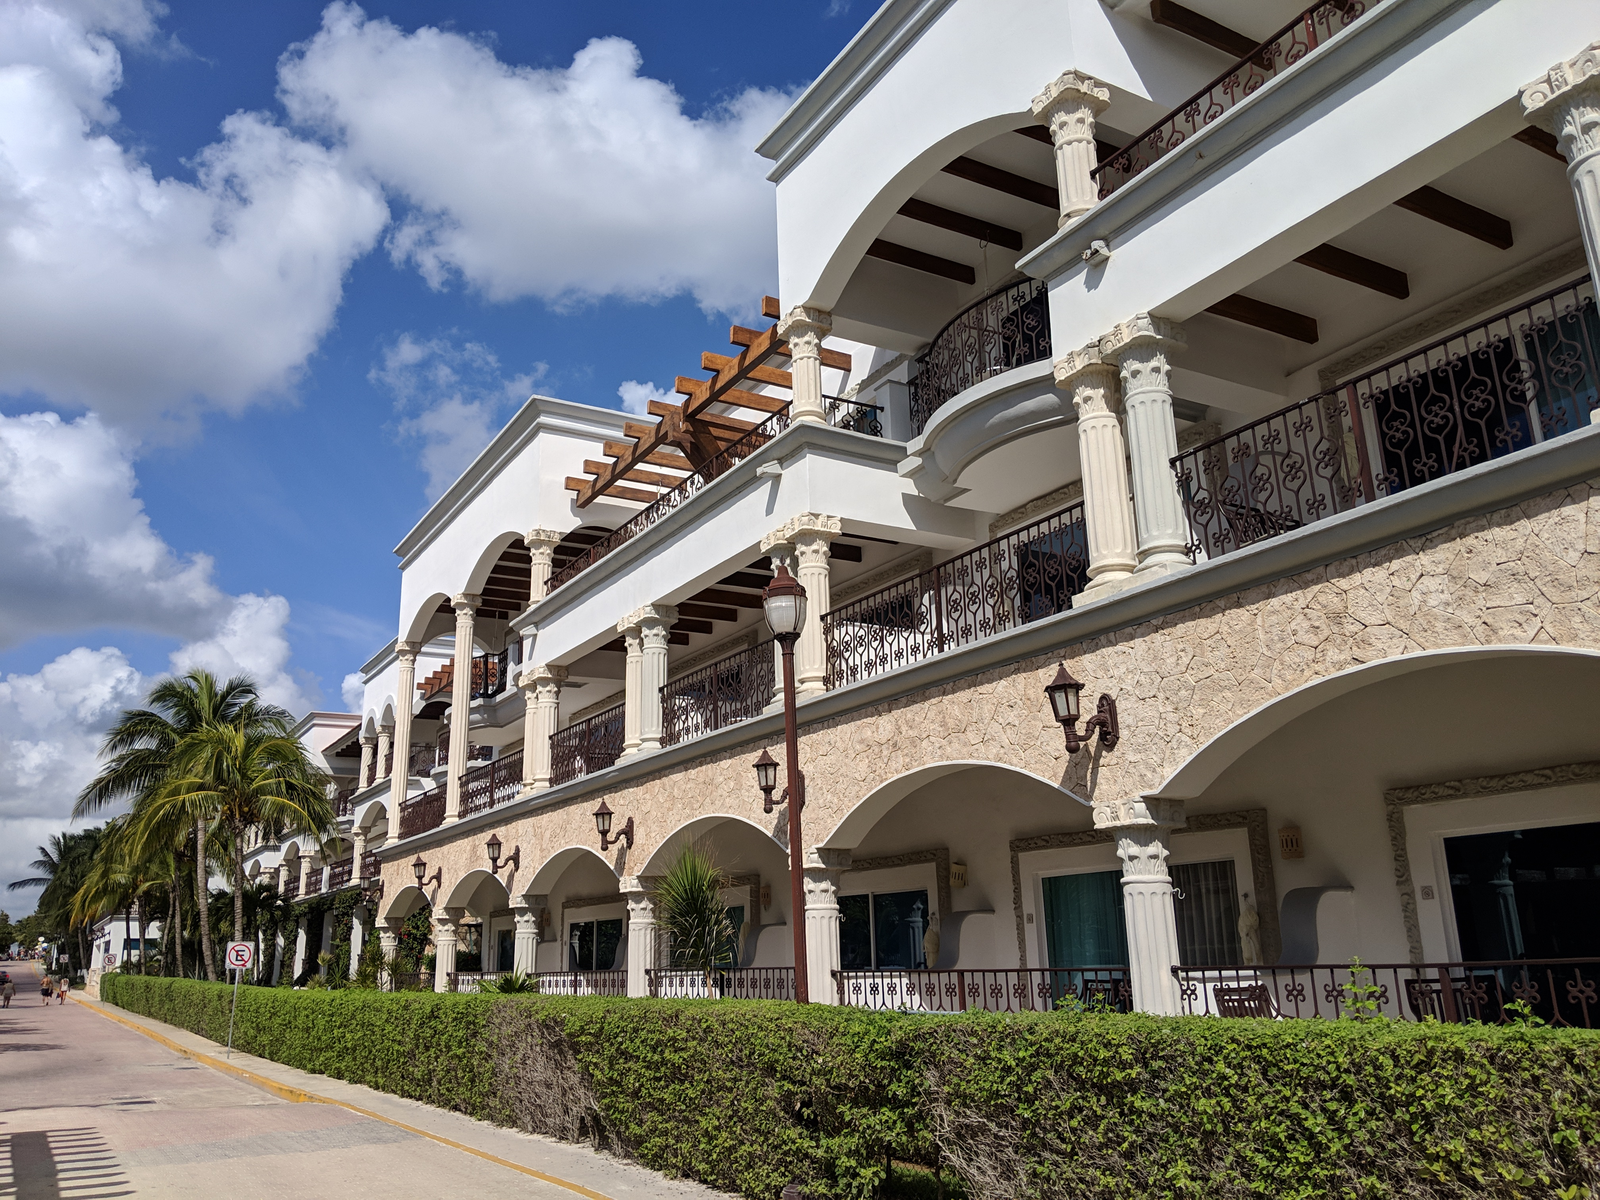 Exterior view on Hilton Playa del Carmen, one of the best all-inclusive resorts in Mexico, with its decorative columns and trimmed sidewalk plants